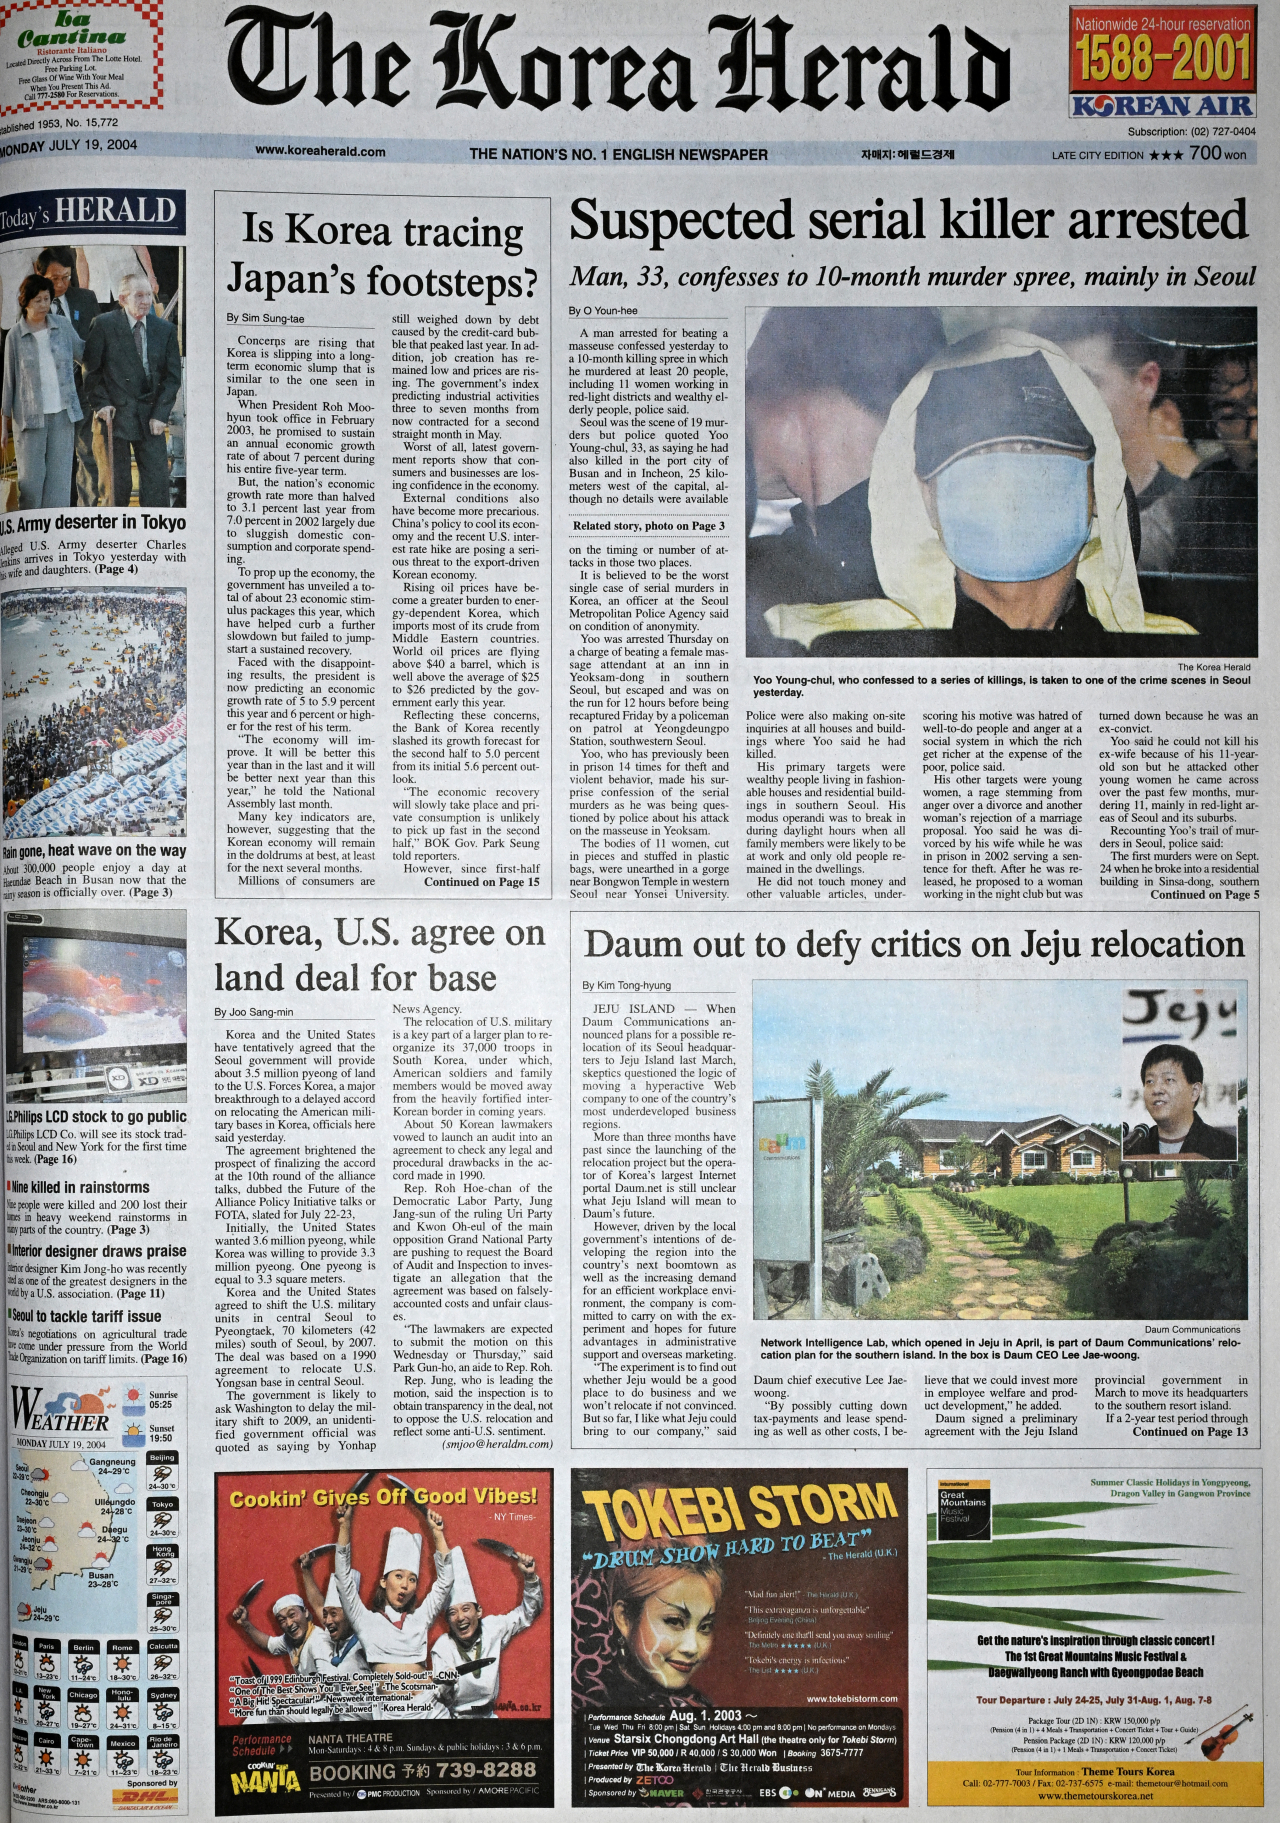 The front page of July 19, 2004 edition of The Korea Herald depicts the arrest of Yoo Young-chul. (The Korea Herald)